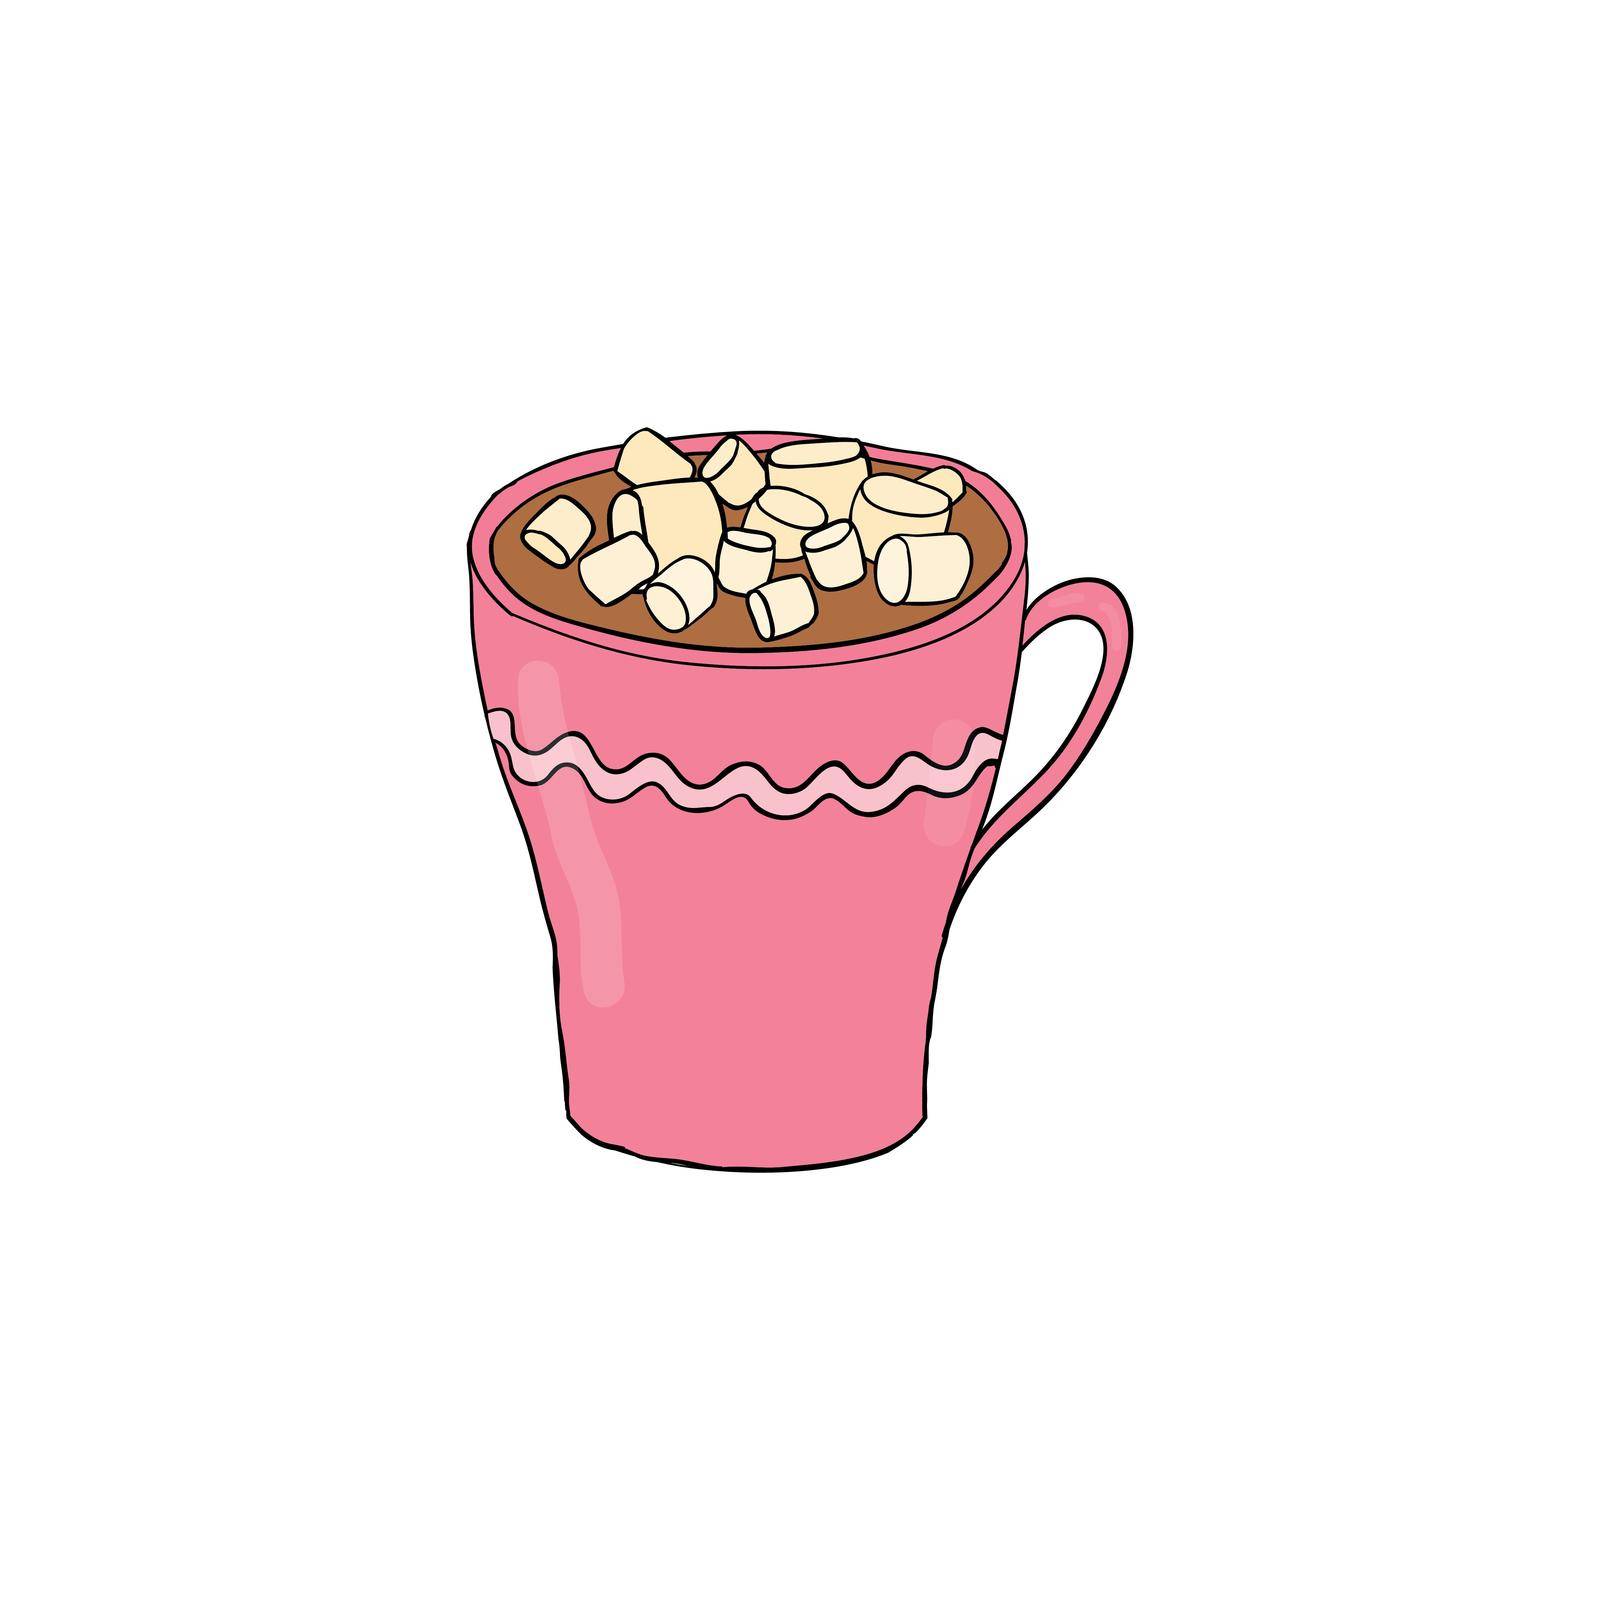 Hand drawn colored cocoa with marshmallow in pink cup isolated on white background.